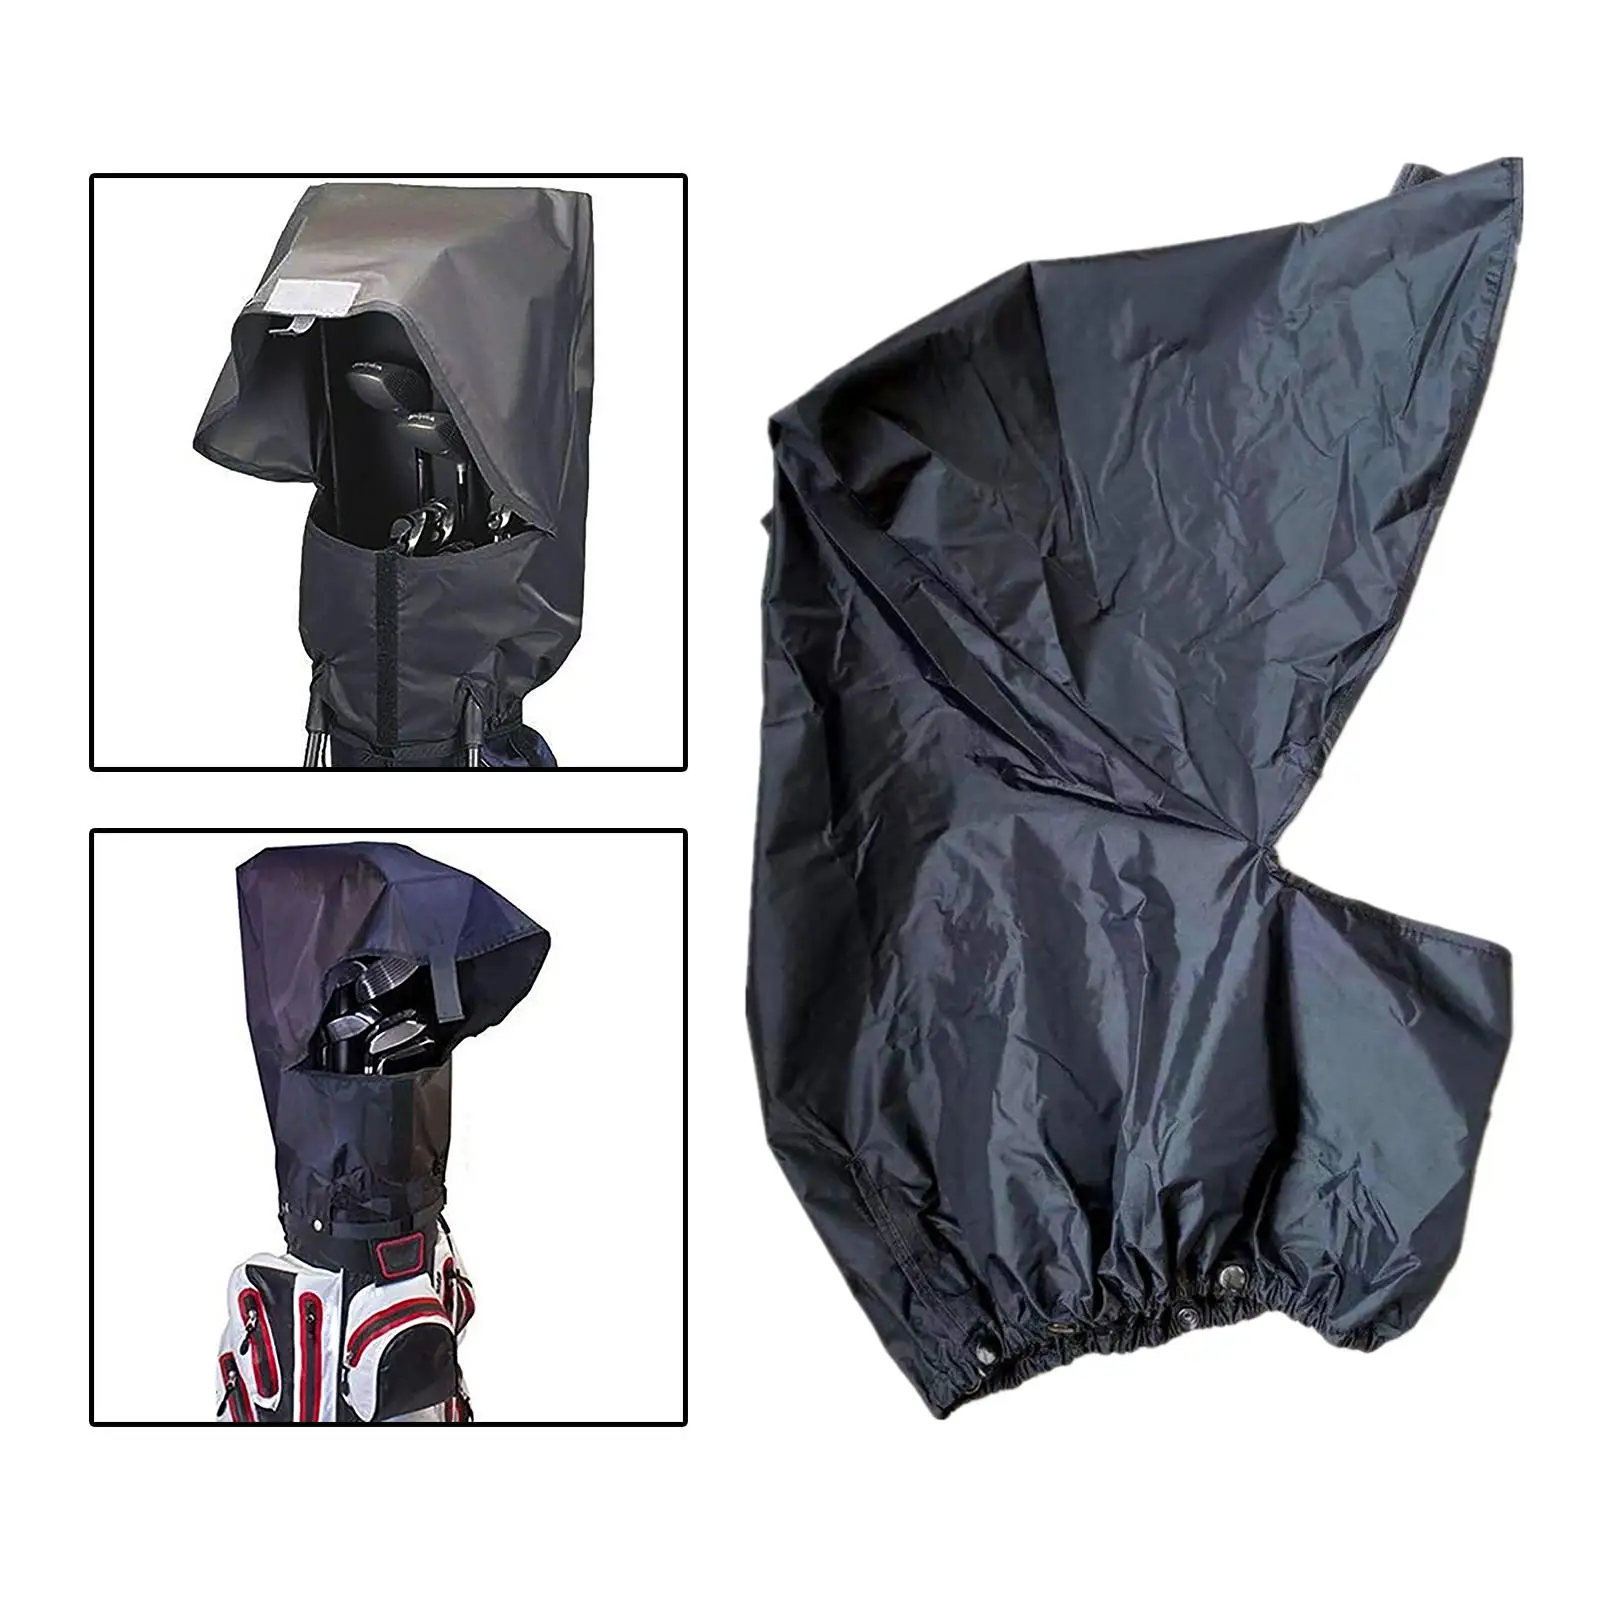 Golf Travel Cover Hood Lightweight Black Protector for Golf Bags Tourbags Golf Club Women